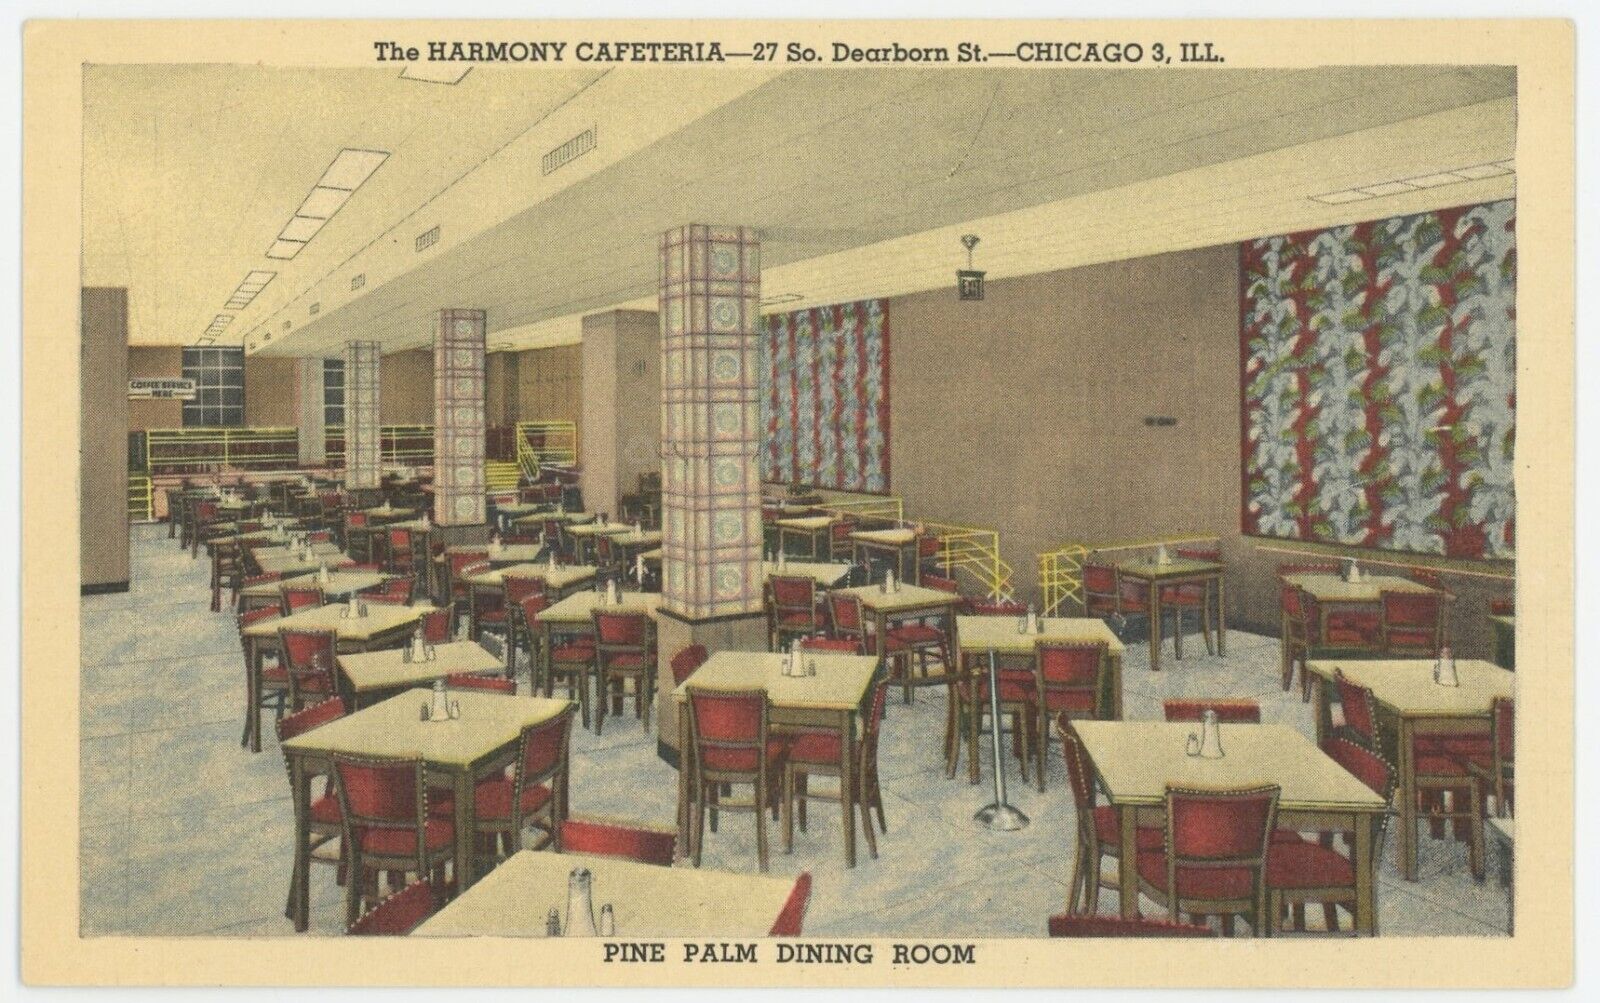 EARLY ADV. POSTCARD - Harmony Cafeteria Pine Palm Dining Room - Chicago IL